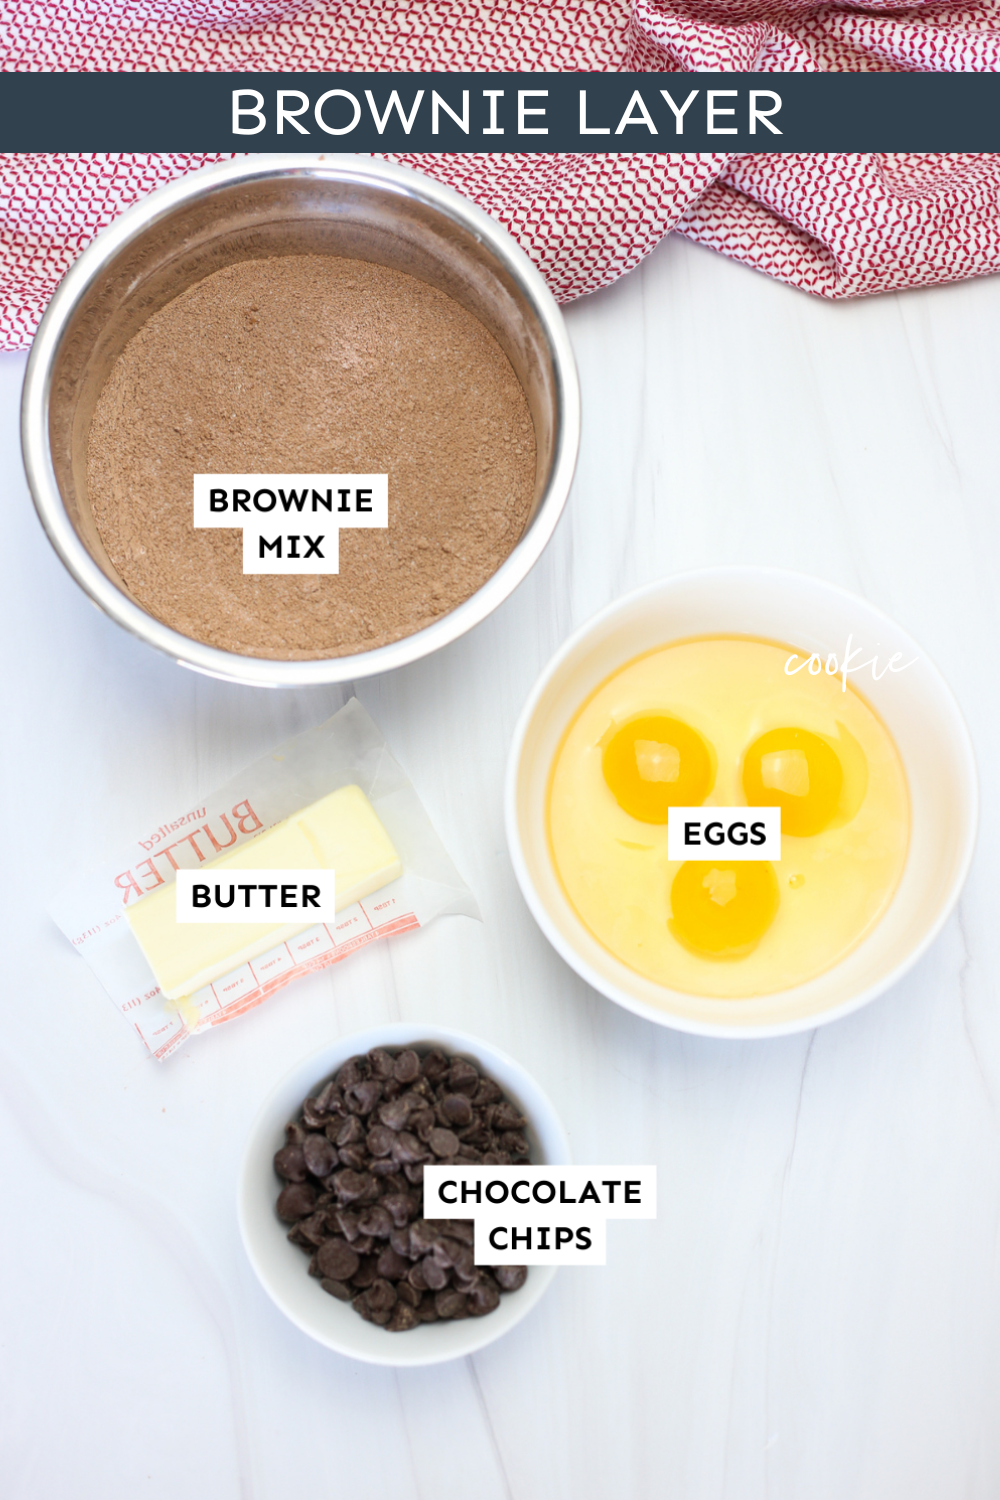 Ingredients for brownie mix.